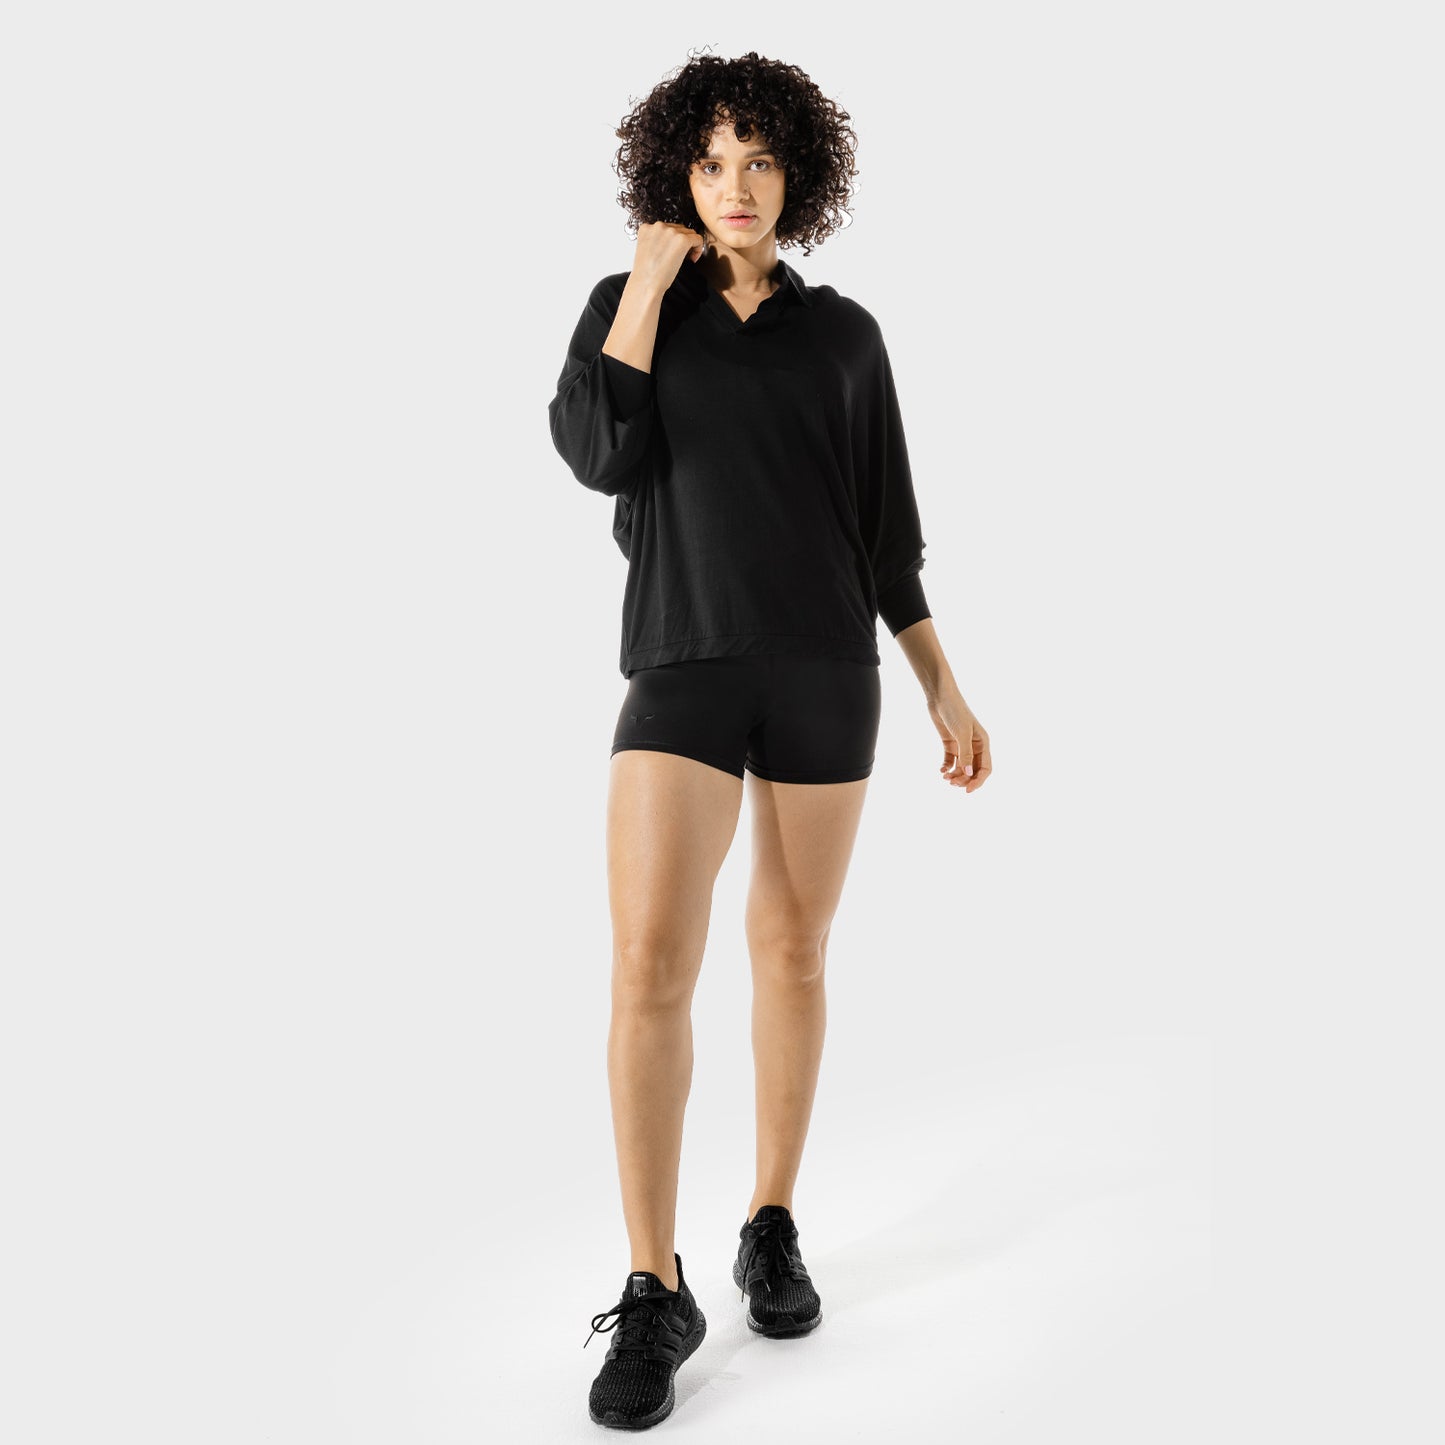 squatwolf-workout-clothes-womens-fitness-oversized-shirt-black-gym-t-shirts